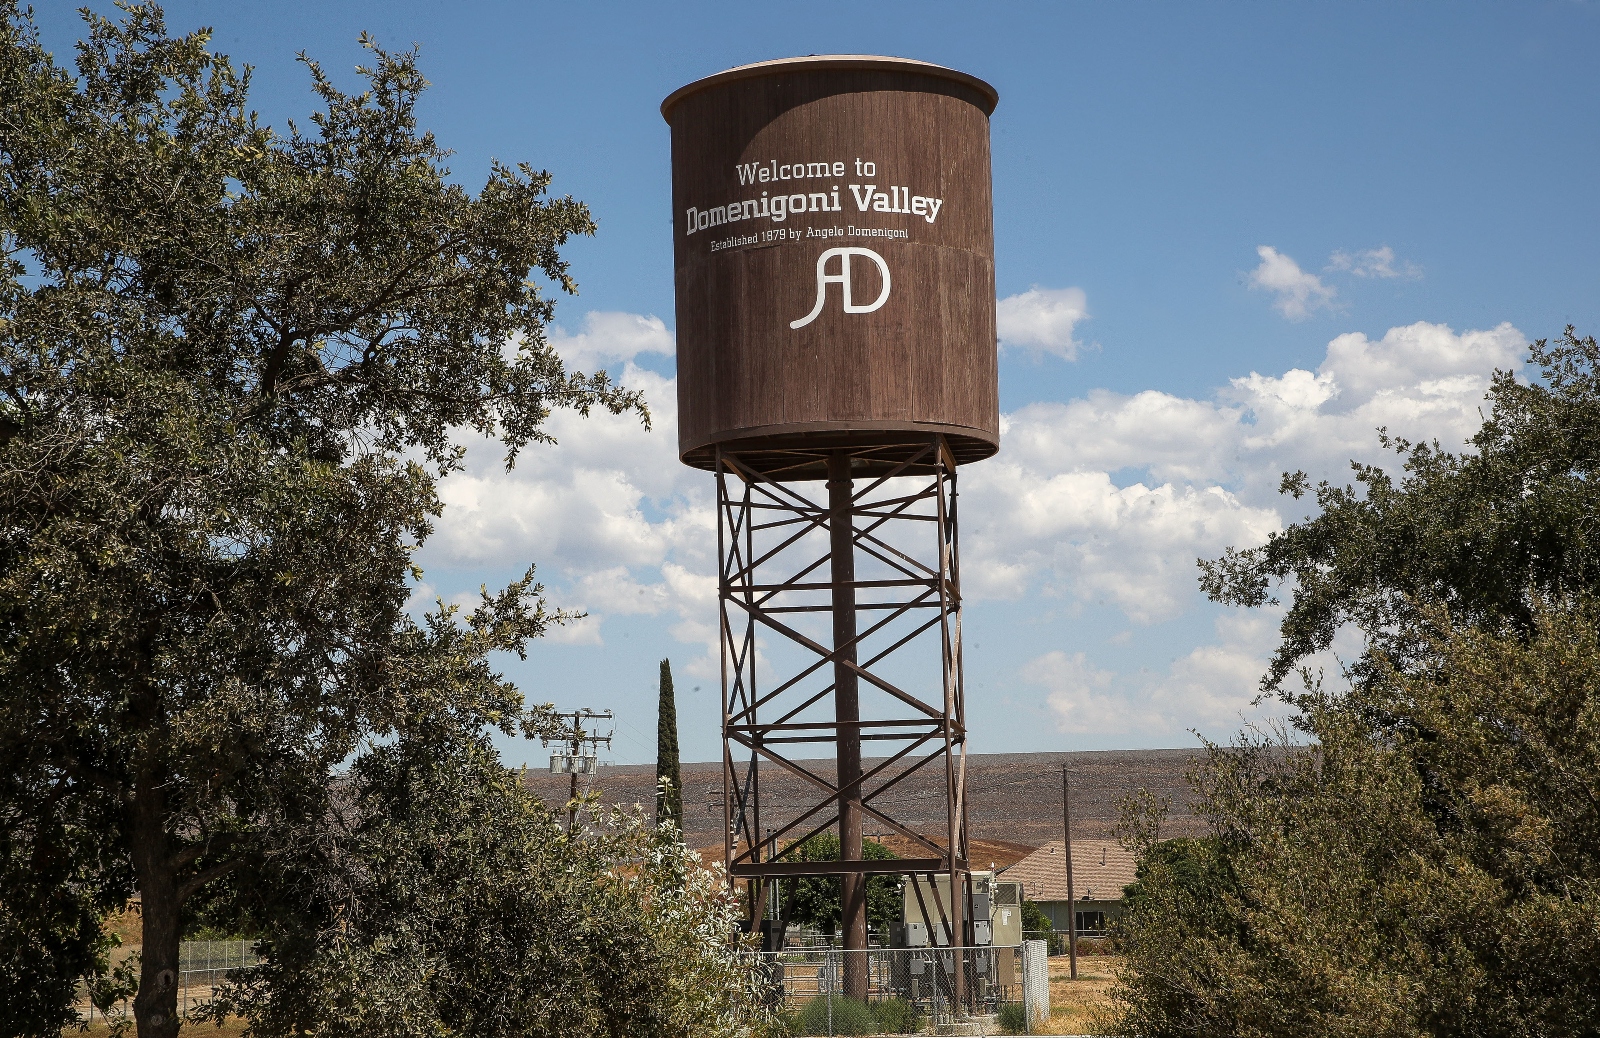 A sign on a tower in Winchester, California, welcomes people to the Domenigoni Valley